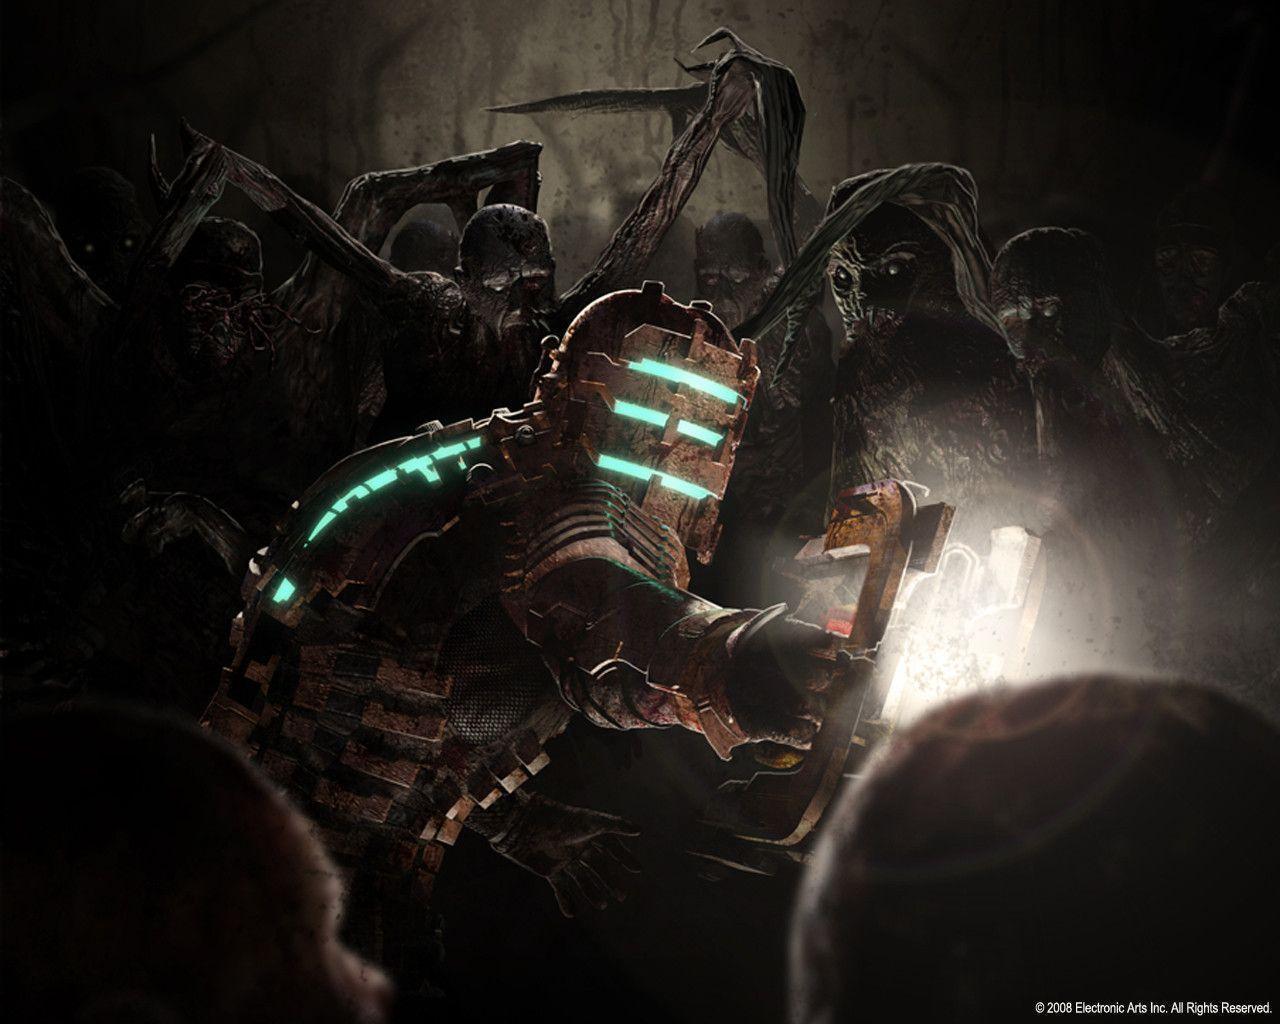 download dead space for free